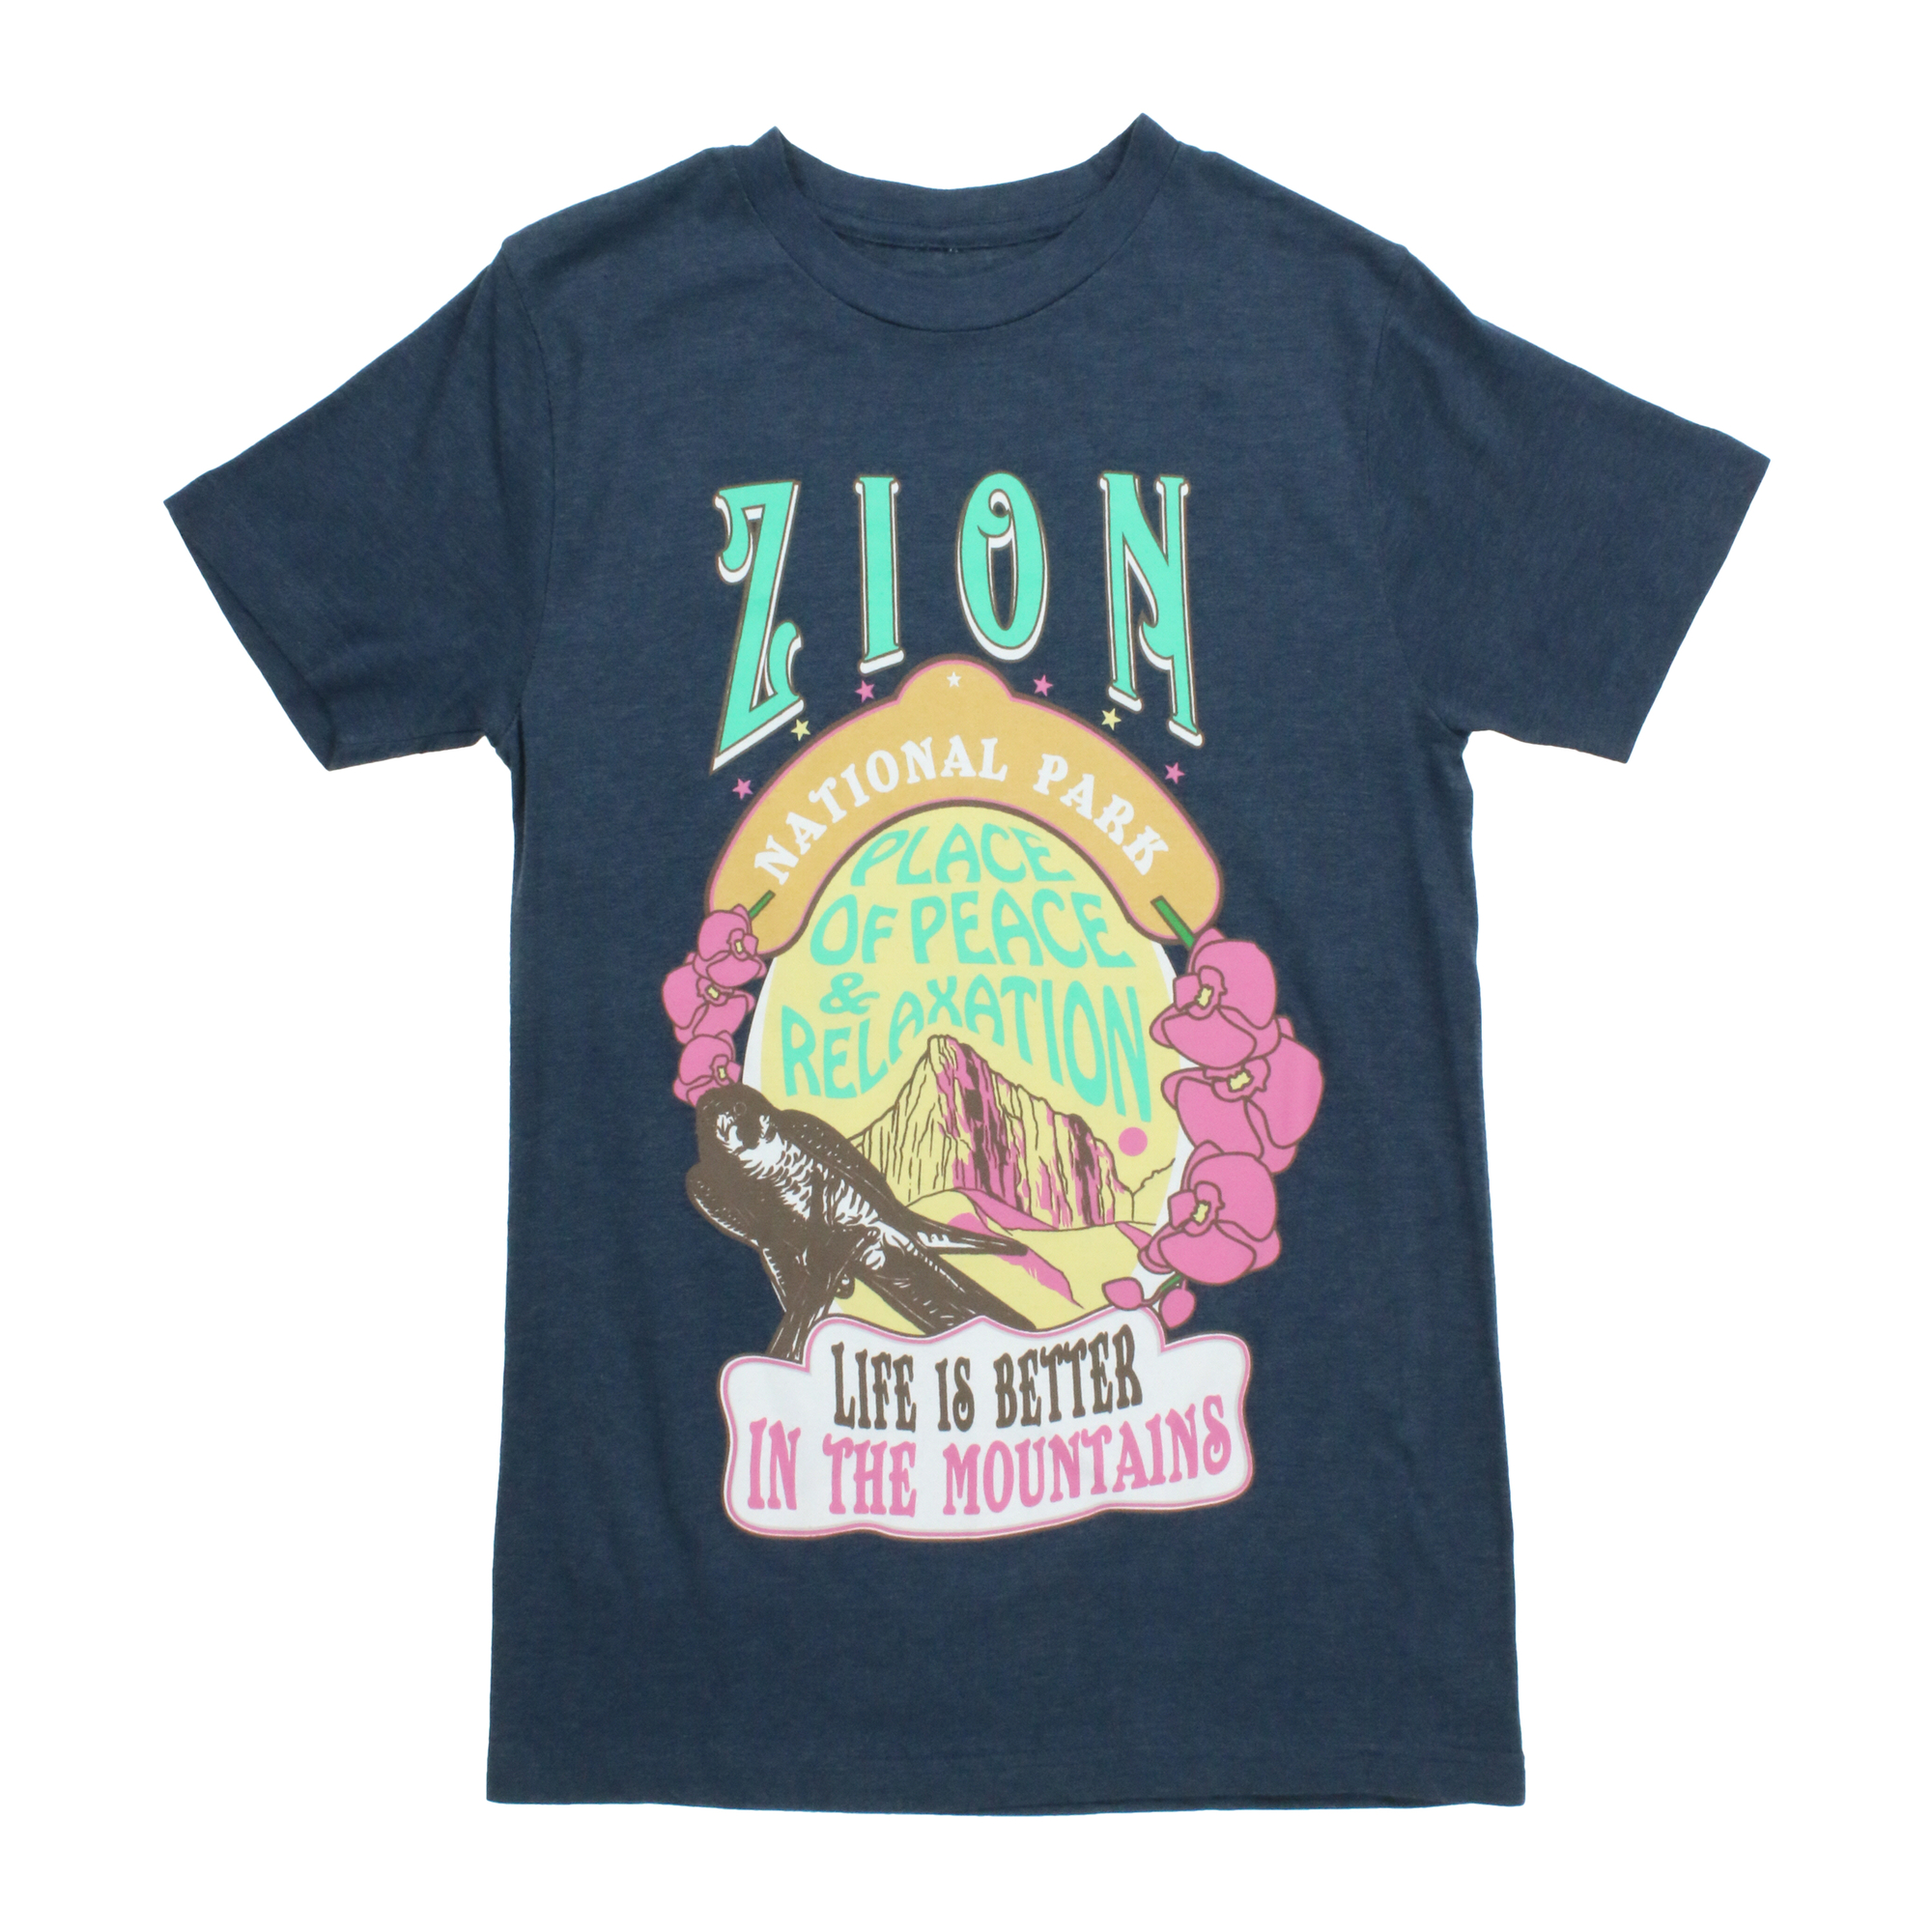 zion national park graphic tee